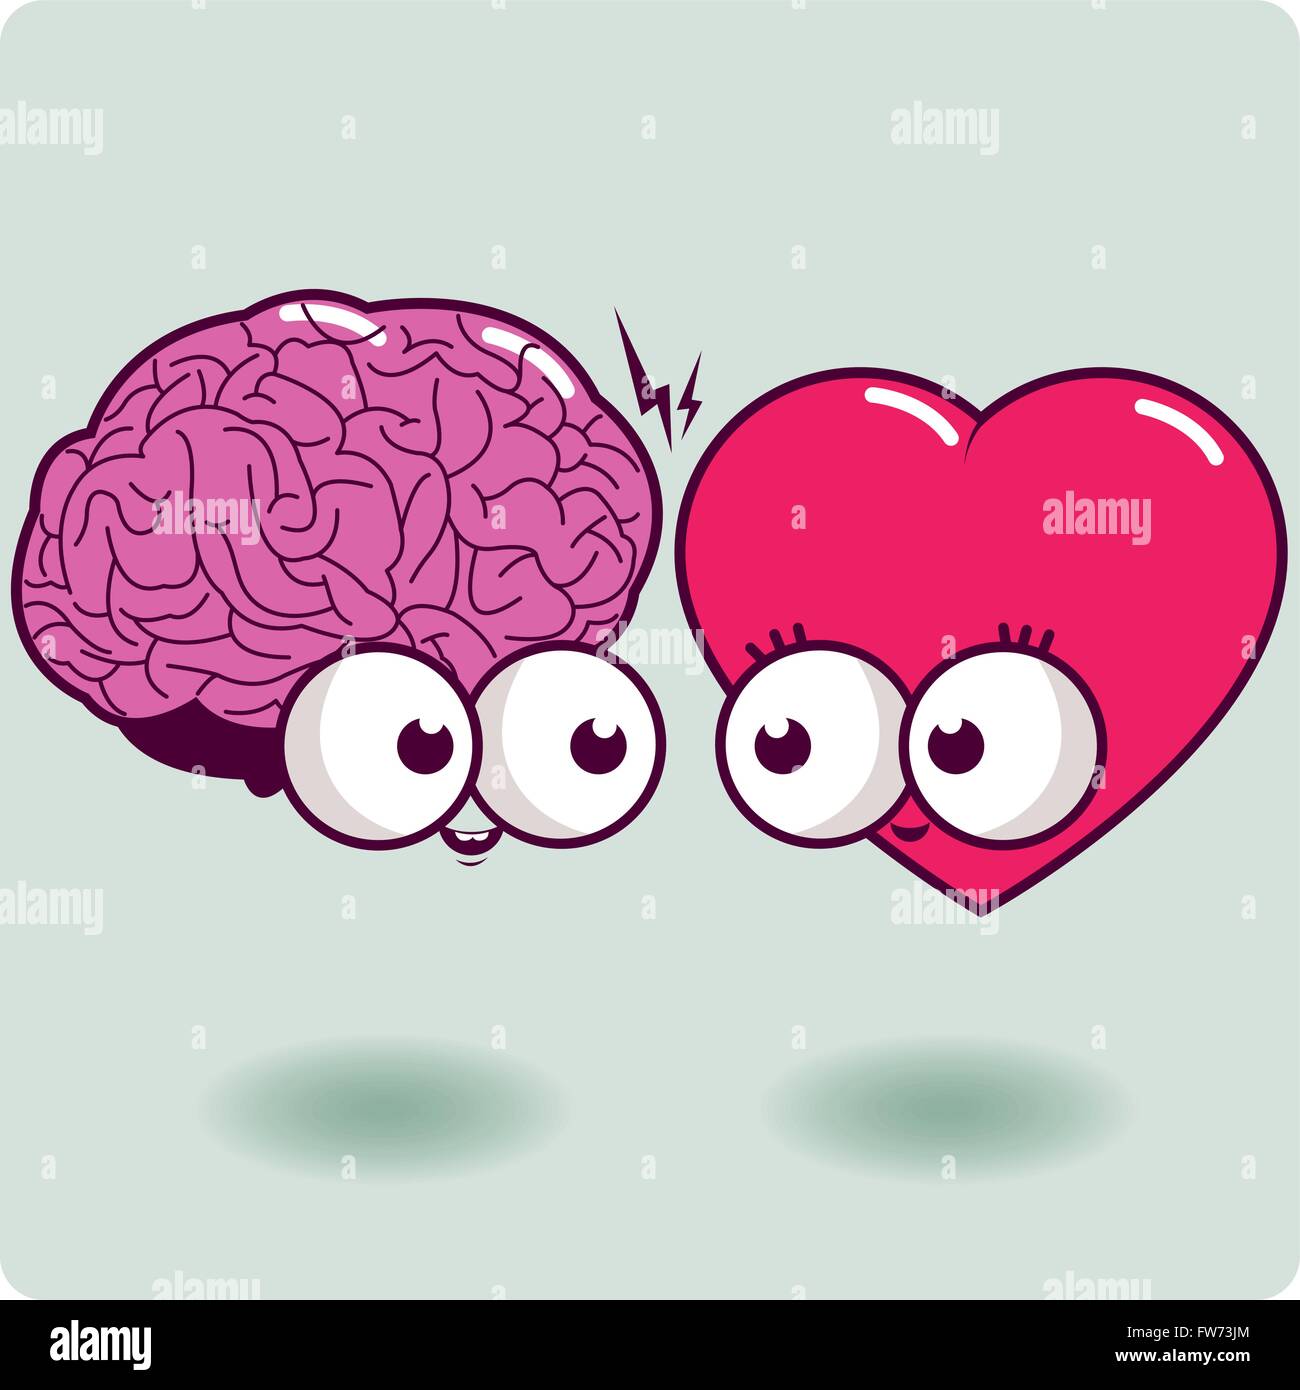 Cute heart and mind characters. Stock Vector